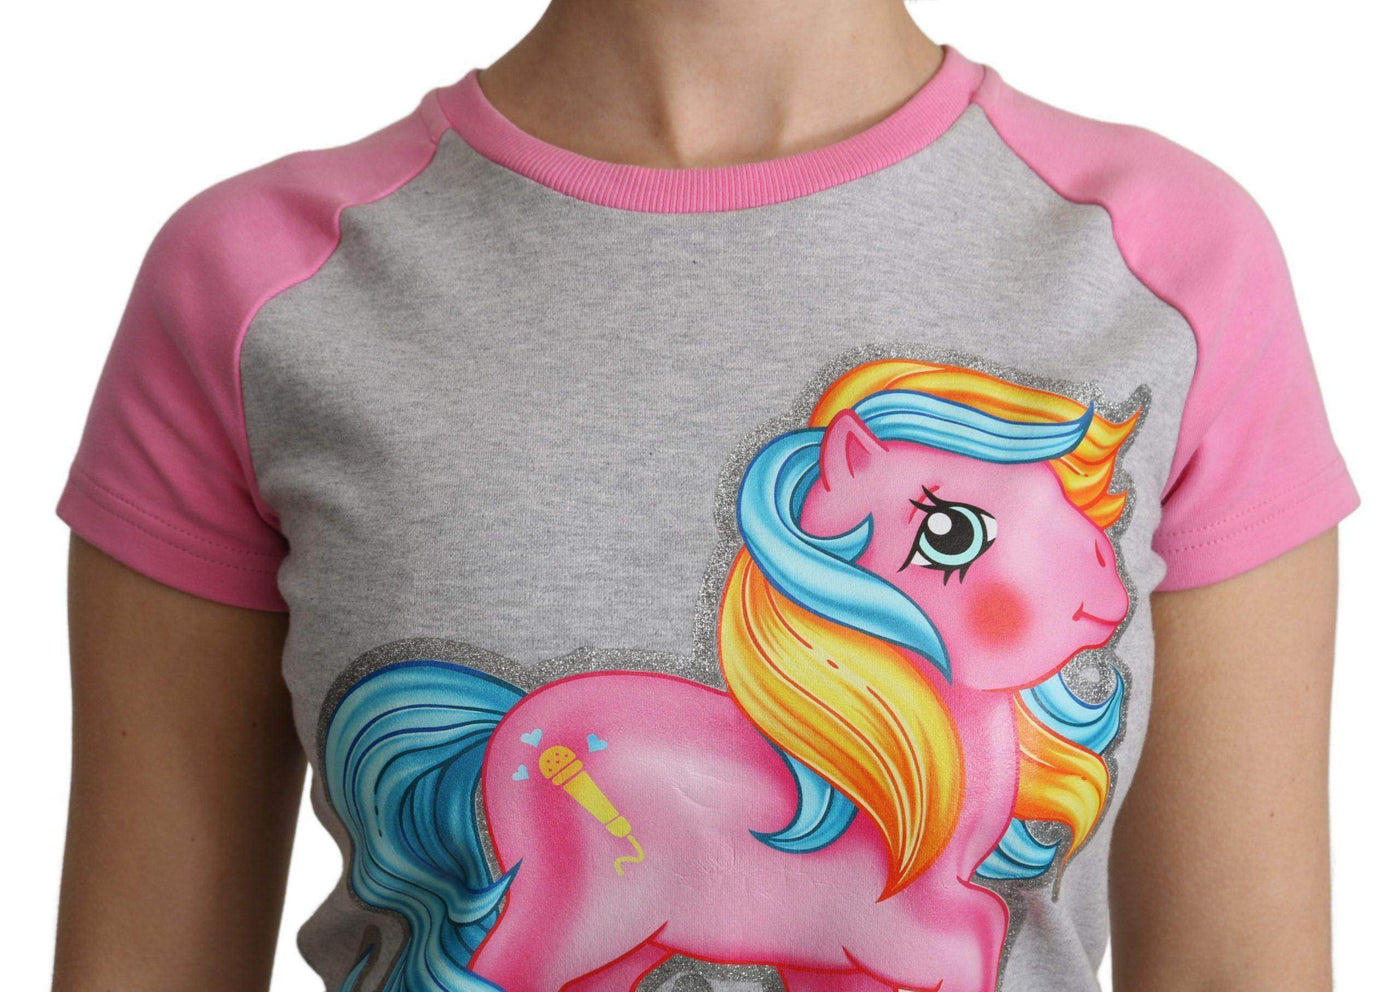 Moschino  and pink Cotton T-shirt My Little Pony Top #women, Catch, feed-agegroup-adult, feed-color-gray, feed-gender-female, feed-size-IT36 | XS, feed-size-IT38|XS, feed-size-IT40|S, feed-size-IT44|L, feed-size-IT46|XL, feed-size-IT48|XXL, Gender_Women, Gray, IT36 | XS, IT38|XS, IT40|S, IT42|M, IT44|L, IT46|XL, IT48|XXL, Kogan, Moschino, Tops & T-Shirts - Women - Clothing, Women - New Arrivals at SEYMAYKA